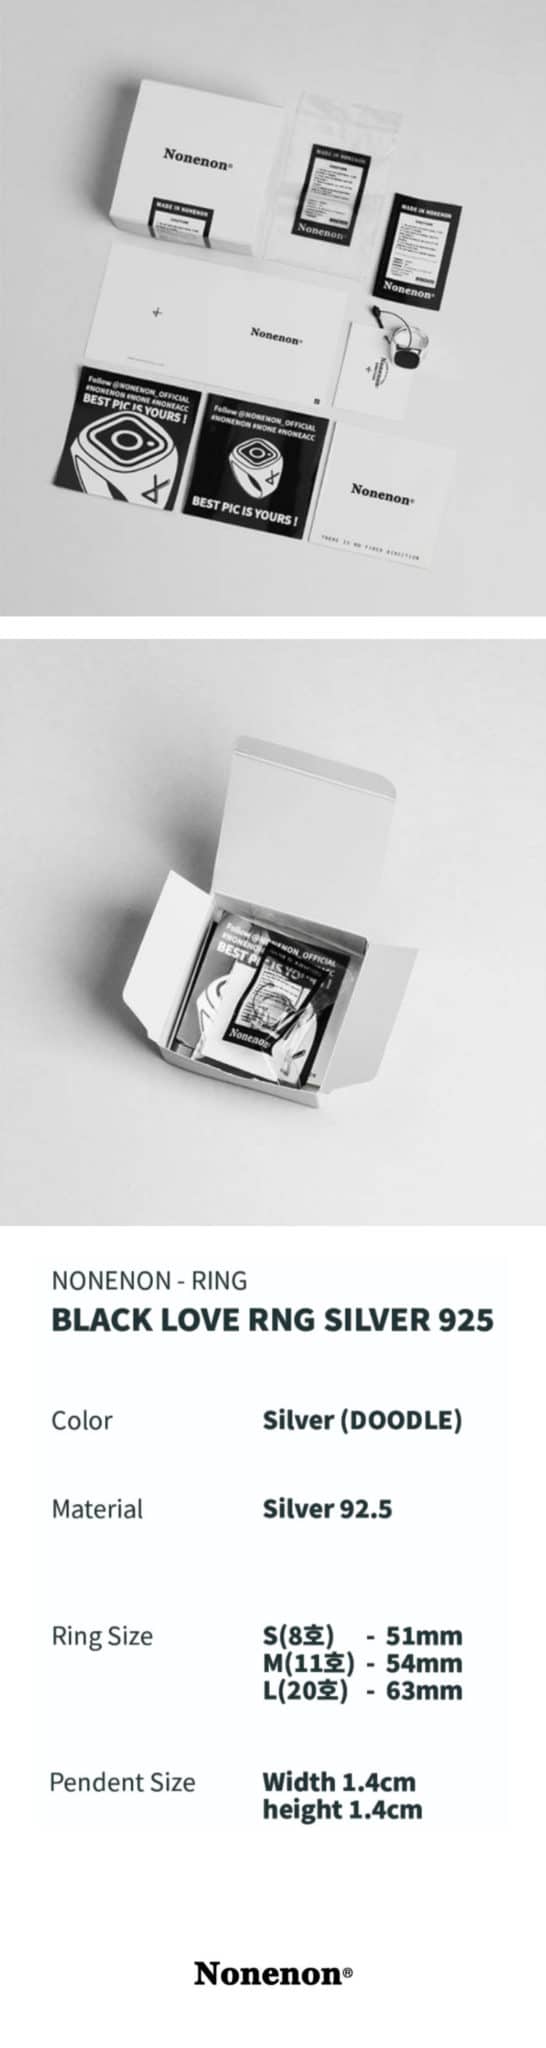 NONENON/ BLACK LOVE RNG SILVER925 (DOODLE) - Now In Seoul